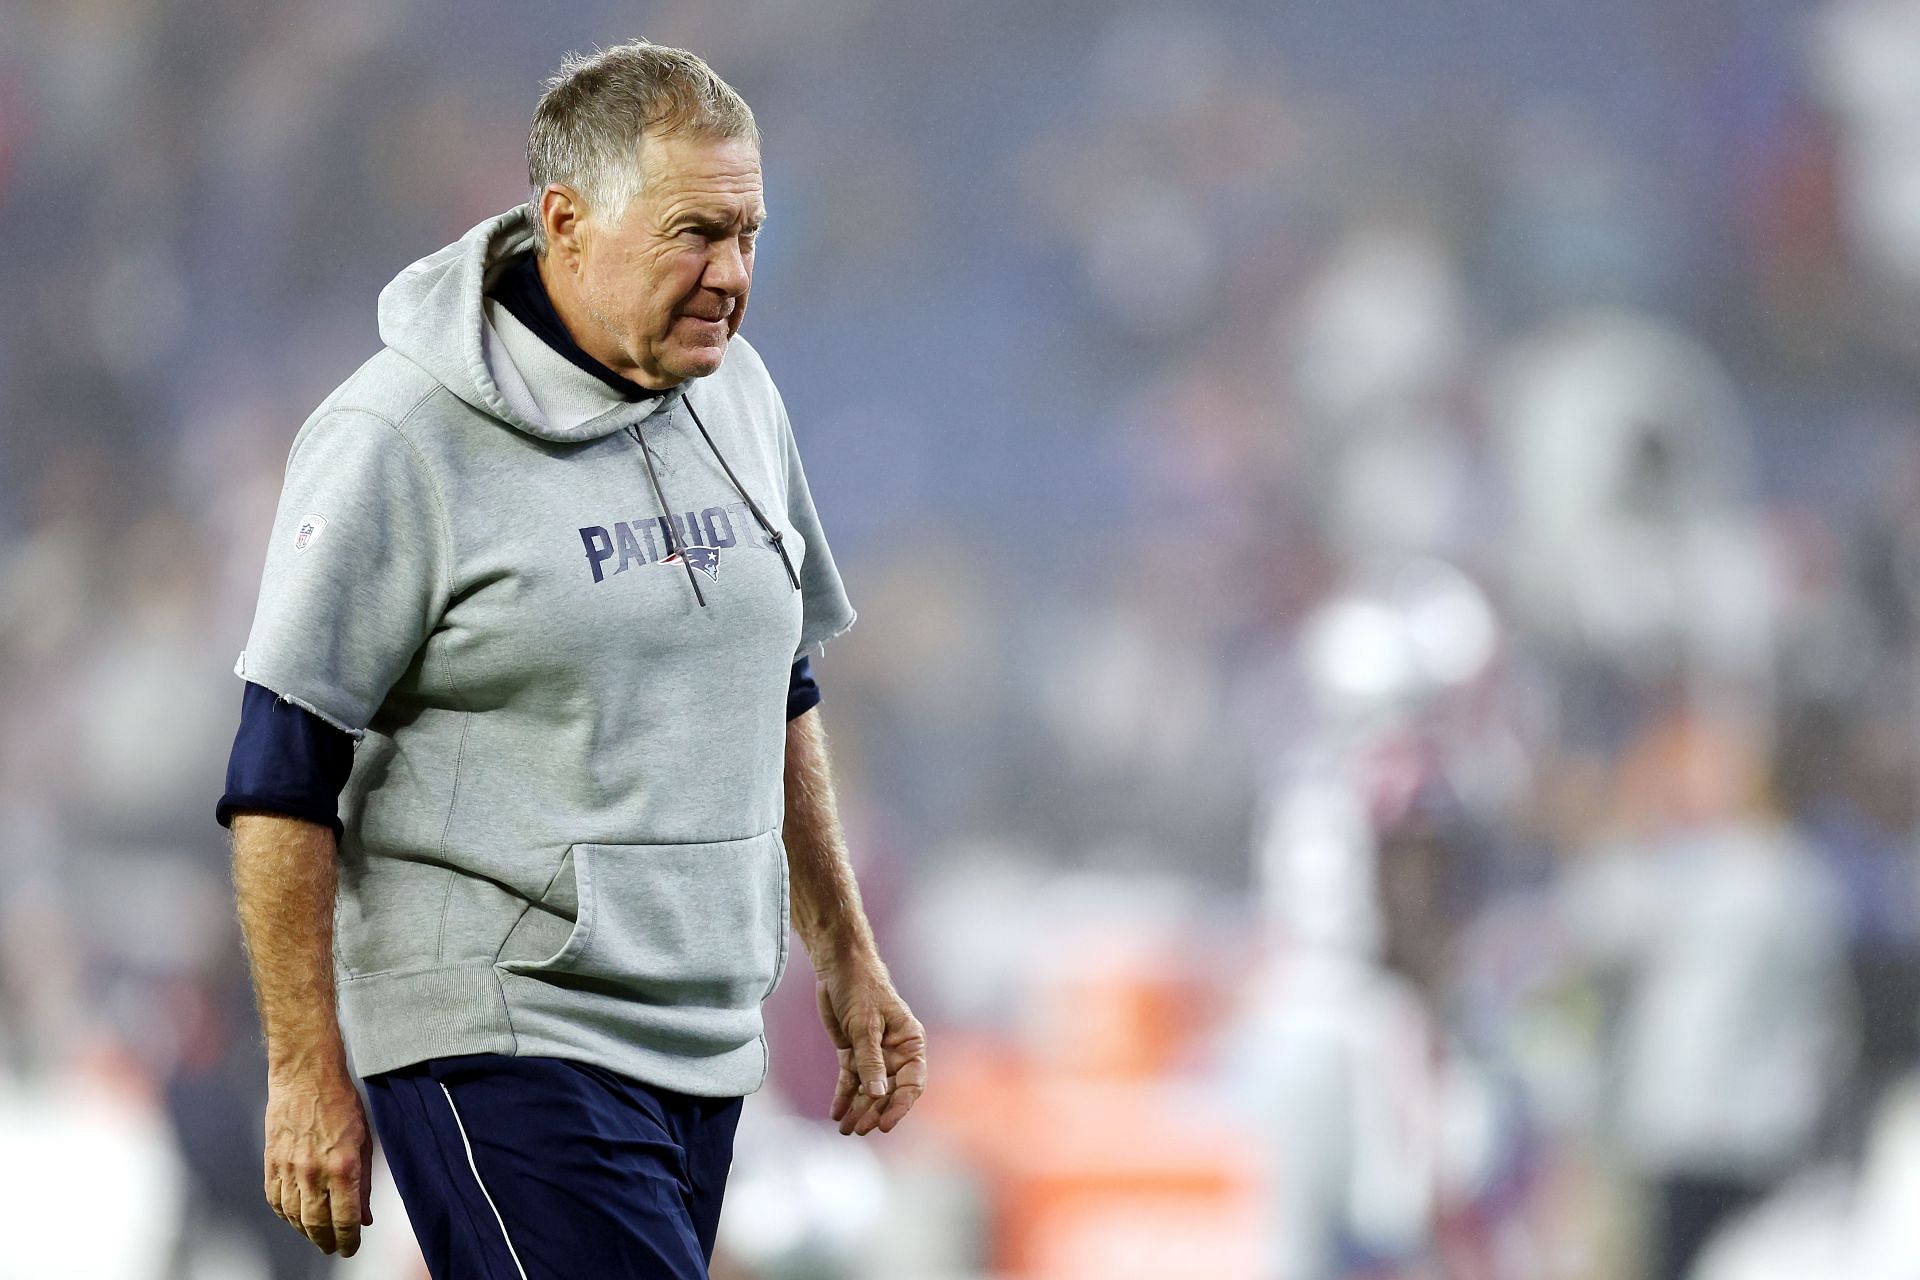 “He f—ked us” – Bill Belichick’s failed season has Patriots staring into the abyss: Report